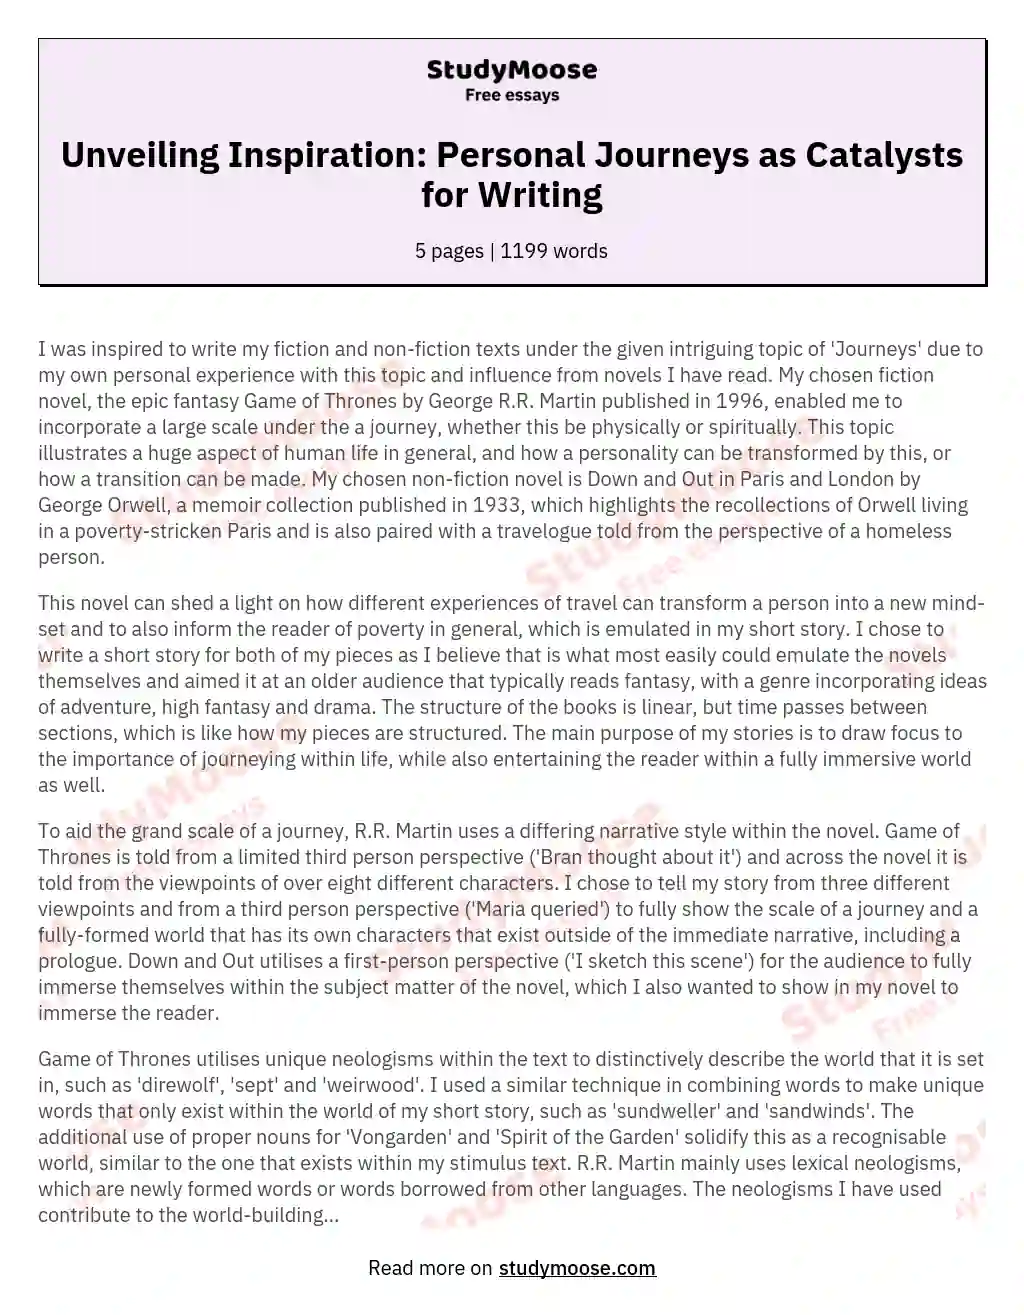 Unveiling Inspiration: Personal Journeys as Catalysts for Writing essay